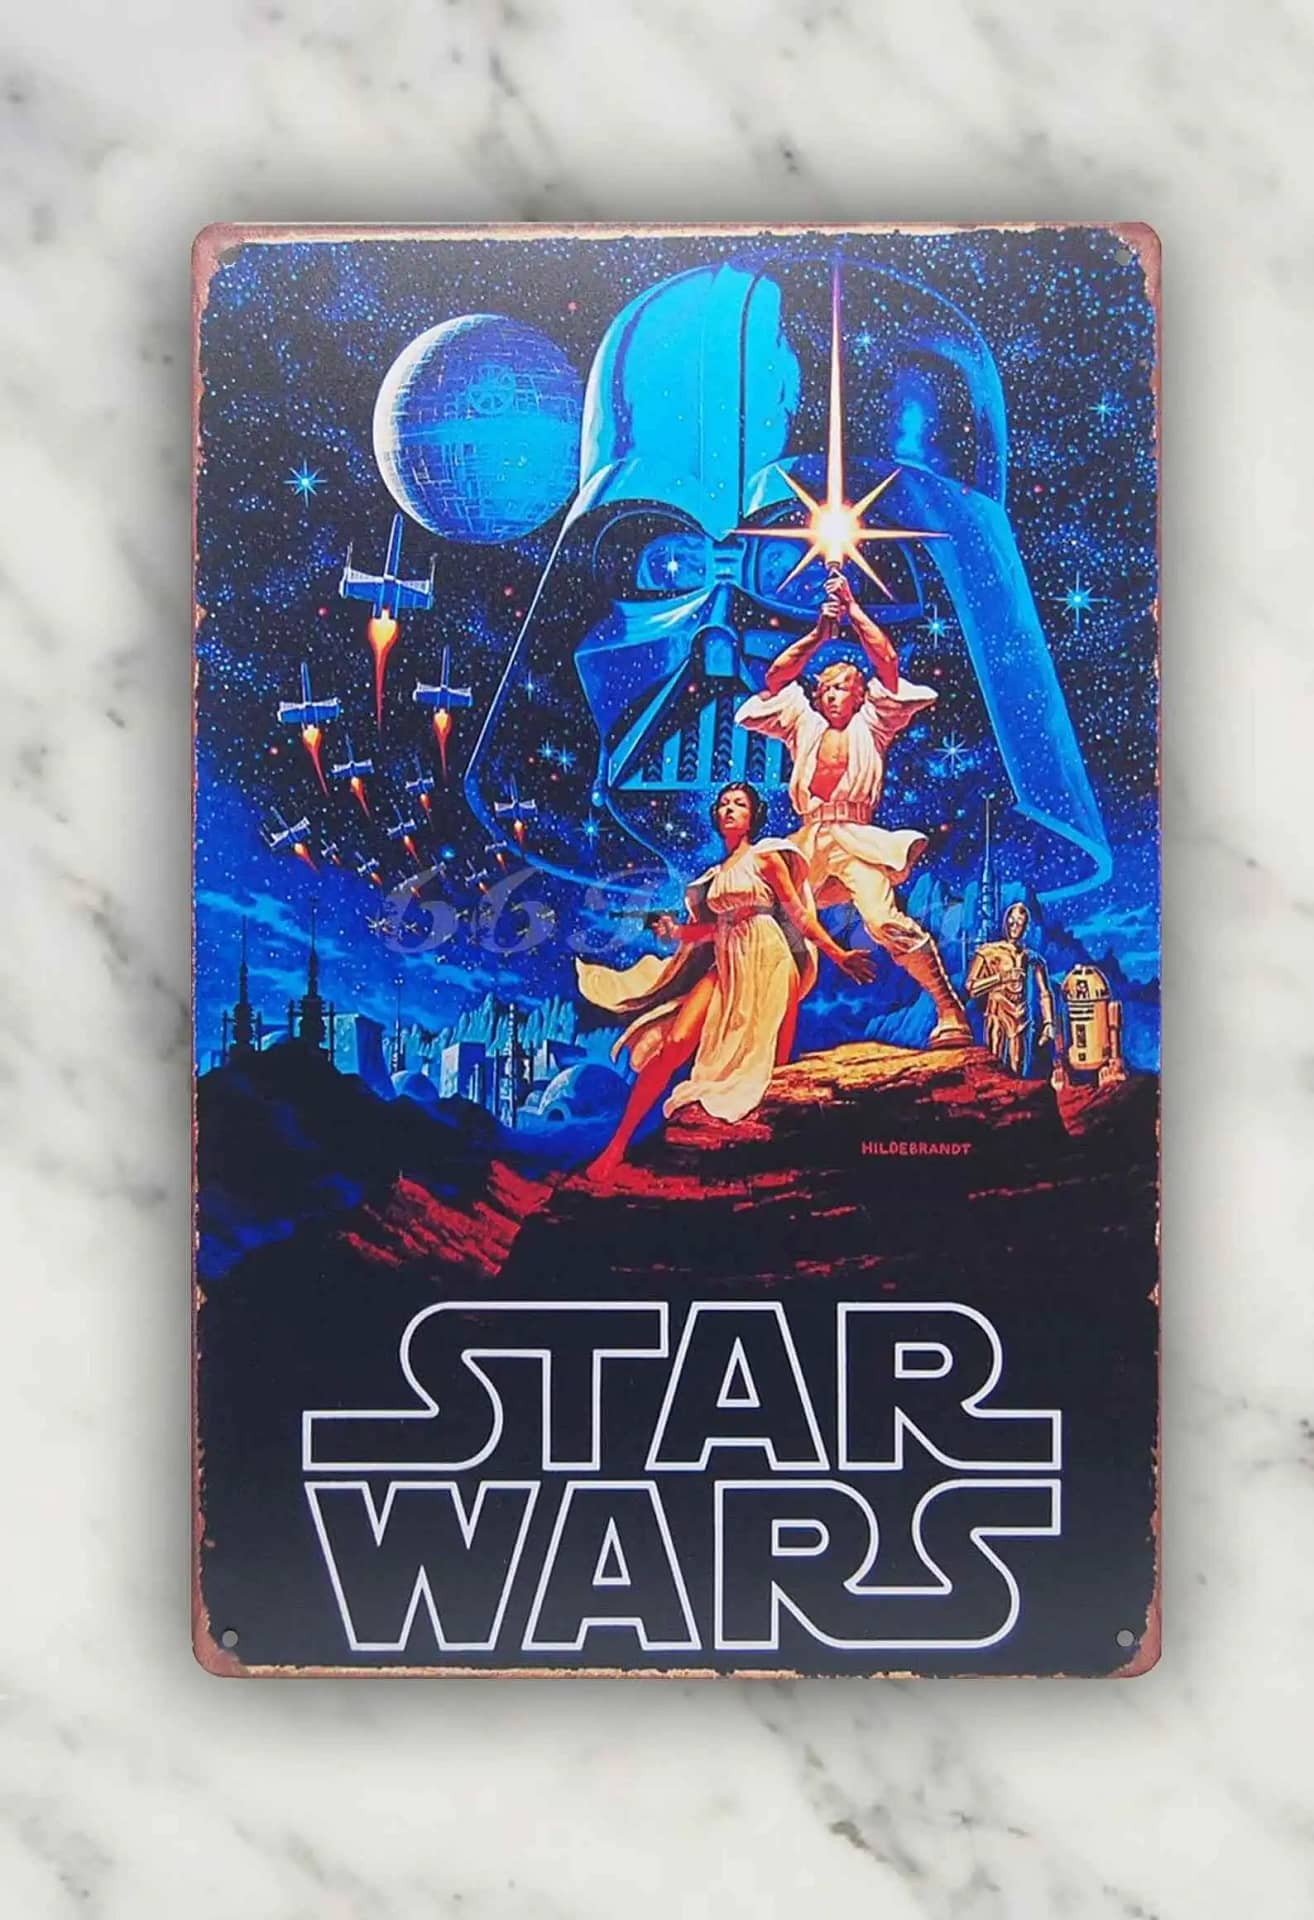 1977 Star Wars Poster Vintage Style Wall Decor Metal Sign